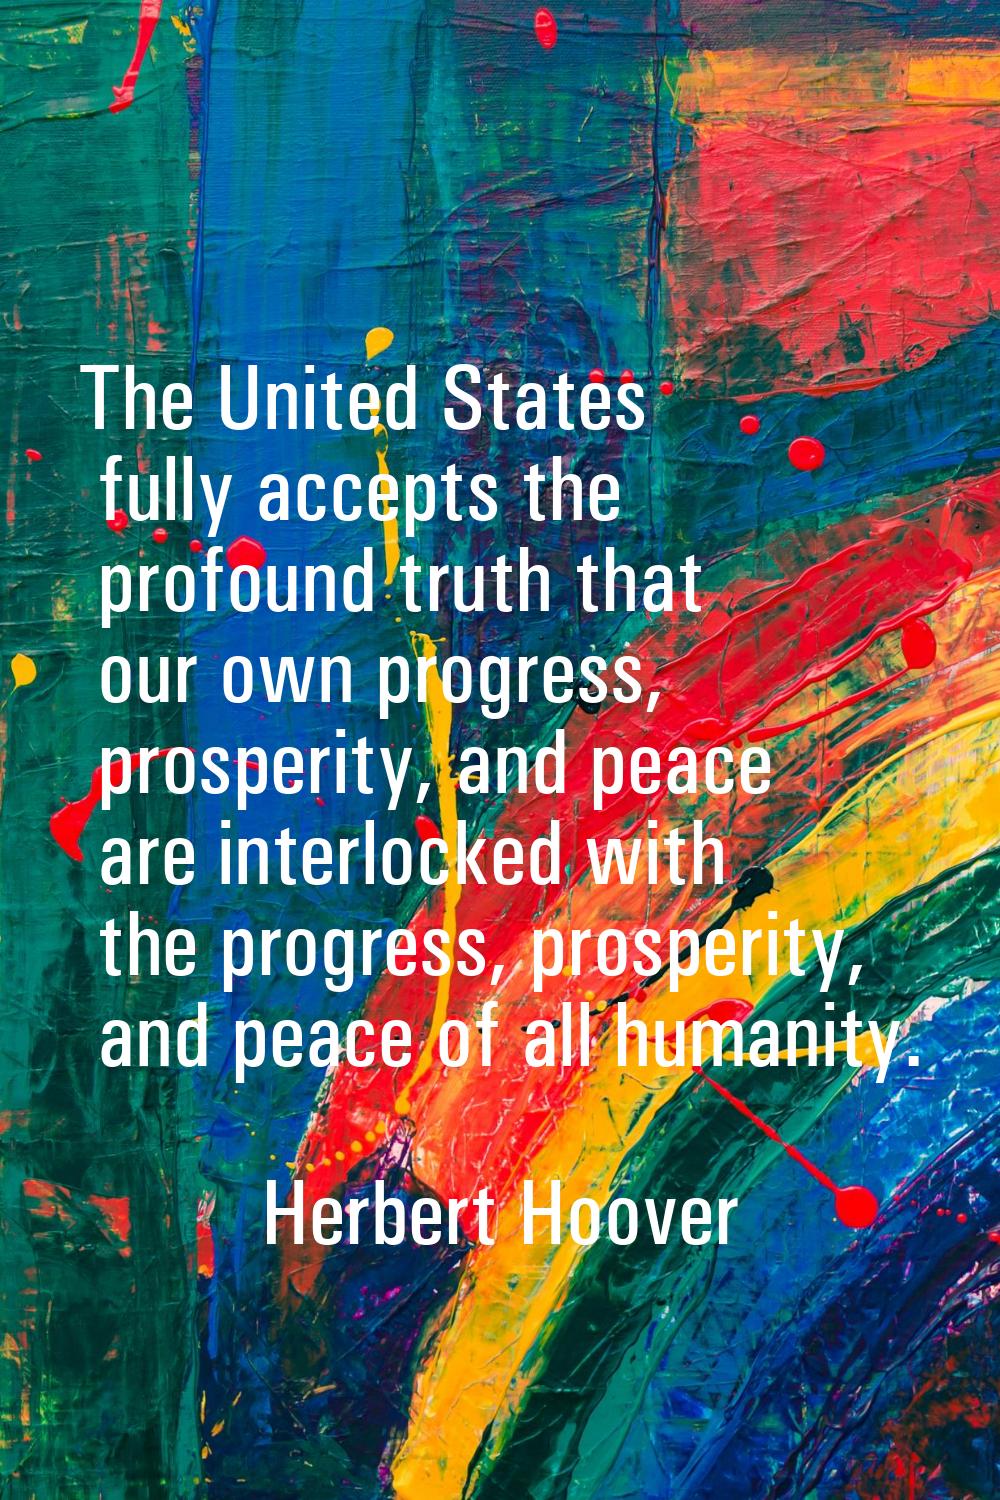 The United States fully accepts the profound truth that our own progress, prosperity, and peace are